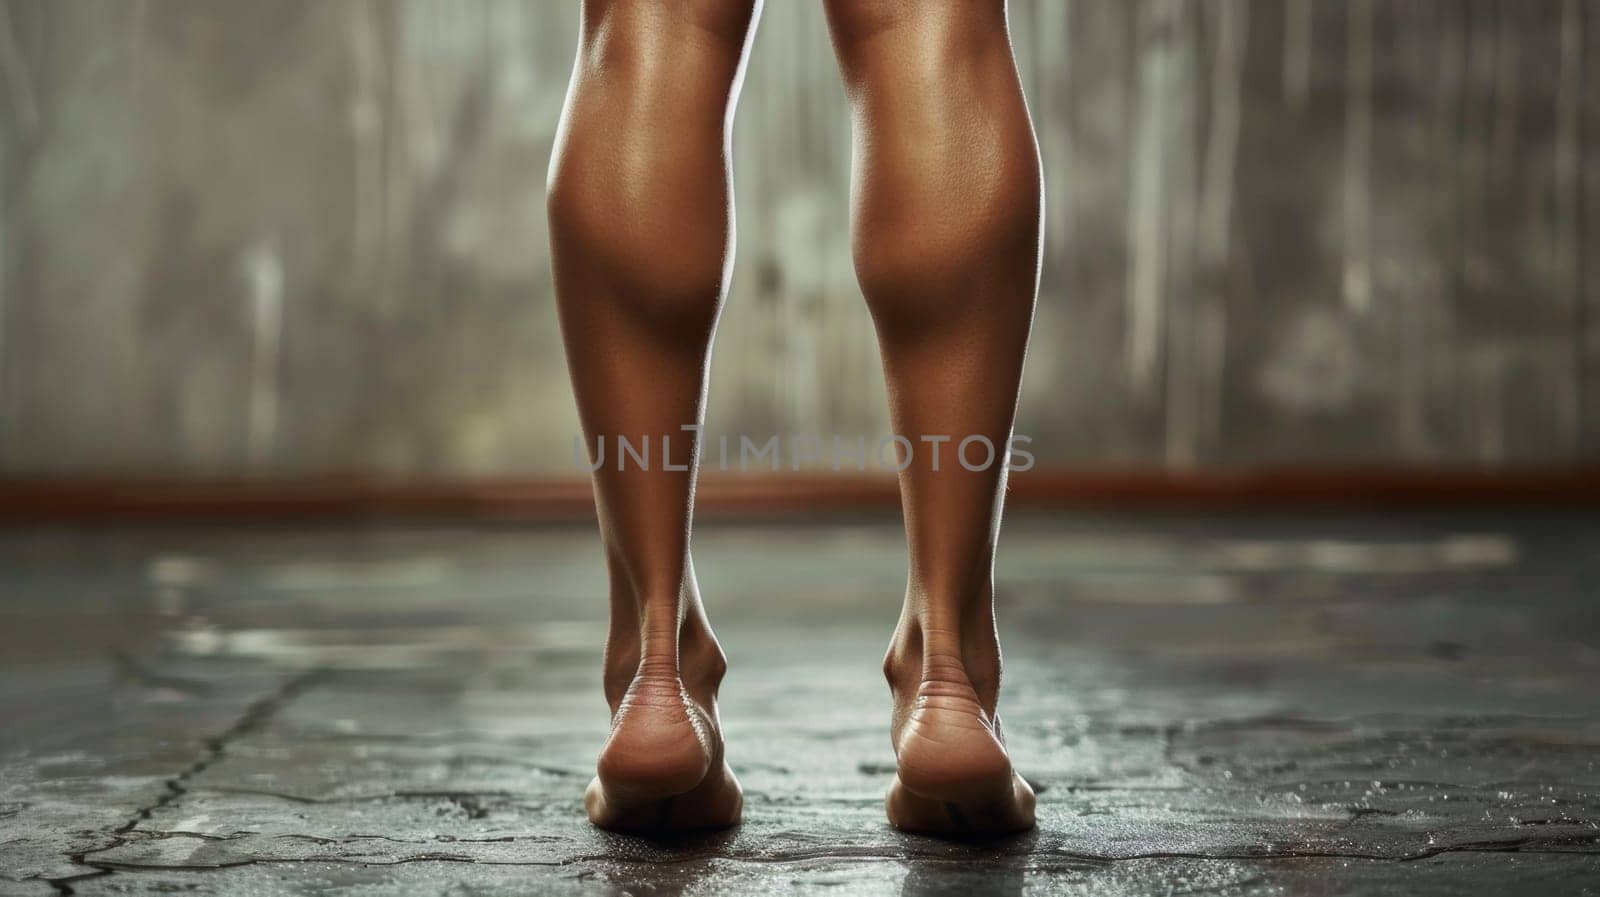 A woman's legs are shown in a close up of her feet